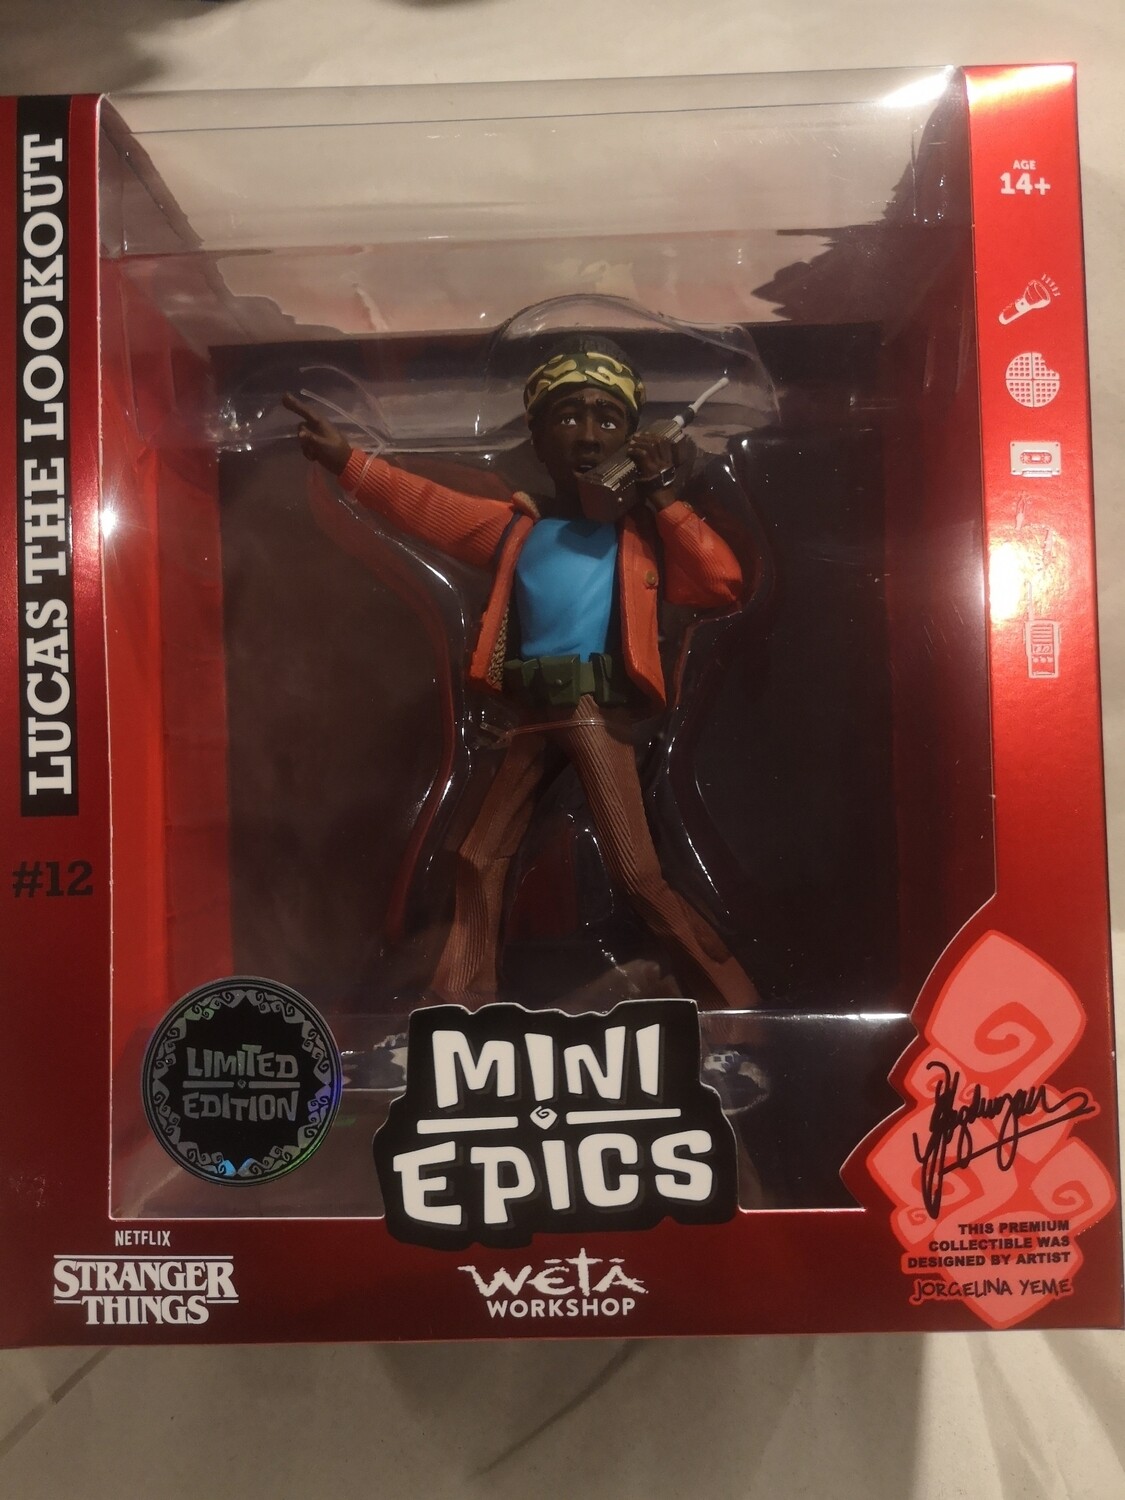 Beeld, Lucas The Lookout, Stranger Things Mini Epics